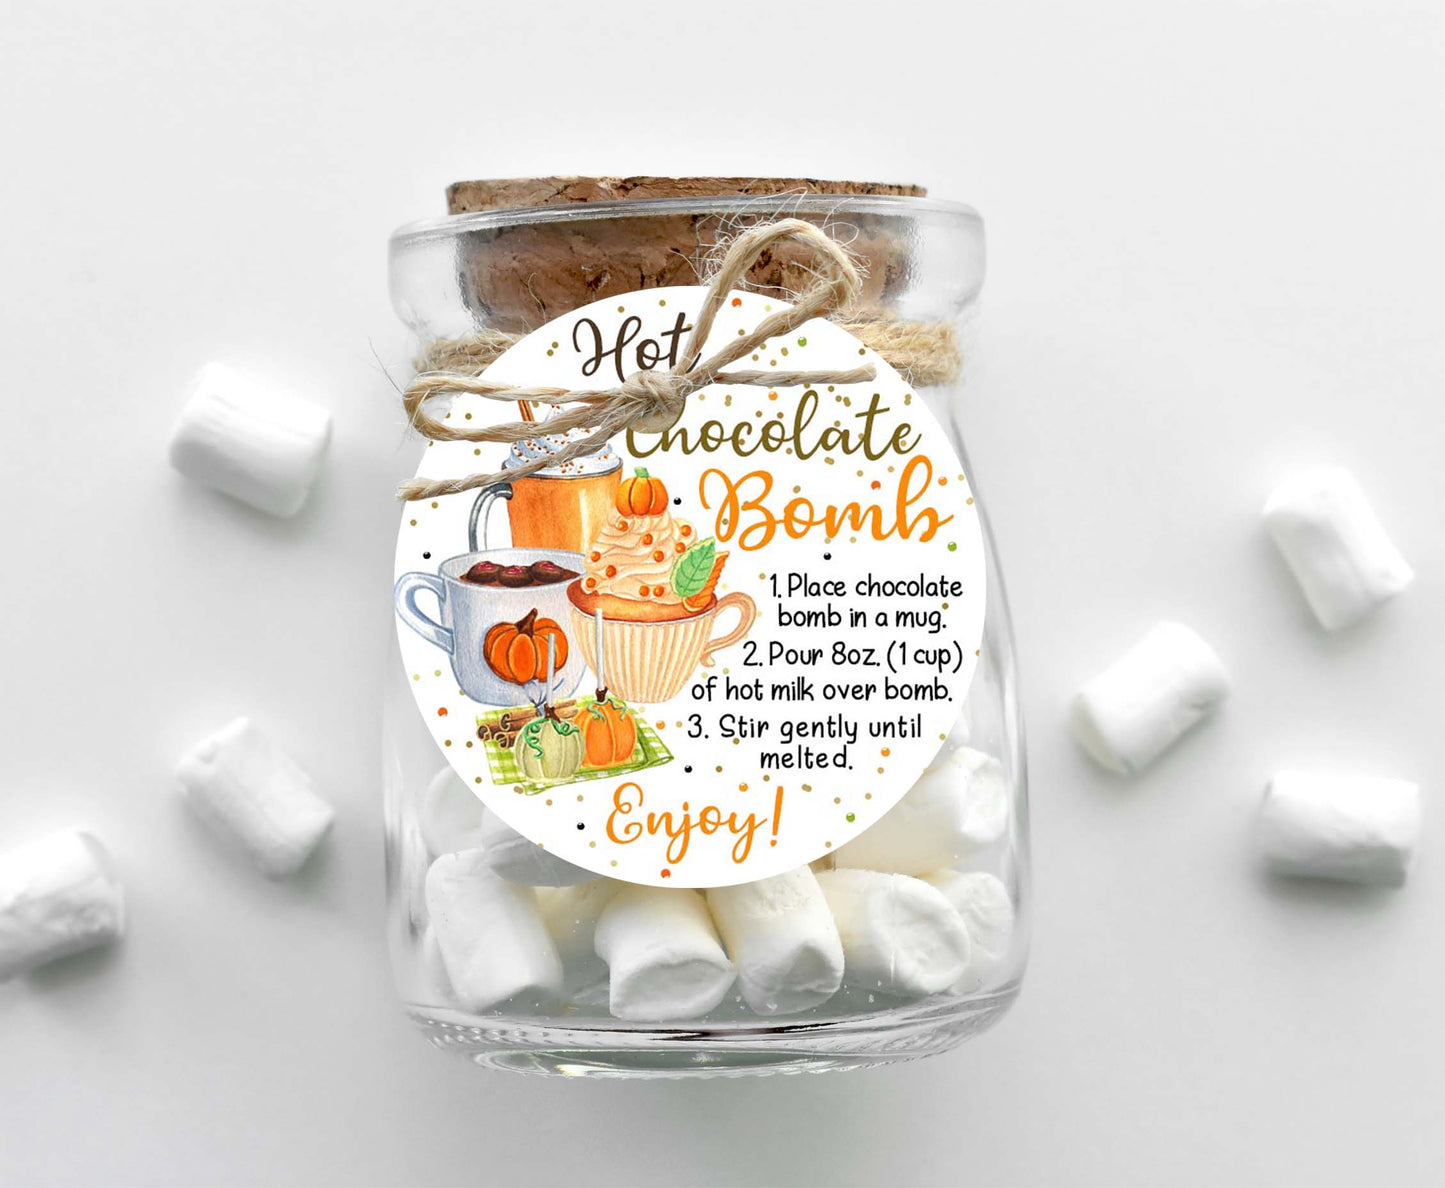 Hot Chocolate Bomb Instructions Tags 2"x2" | Fall Gift Tags- 30